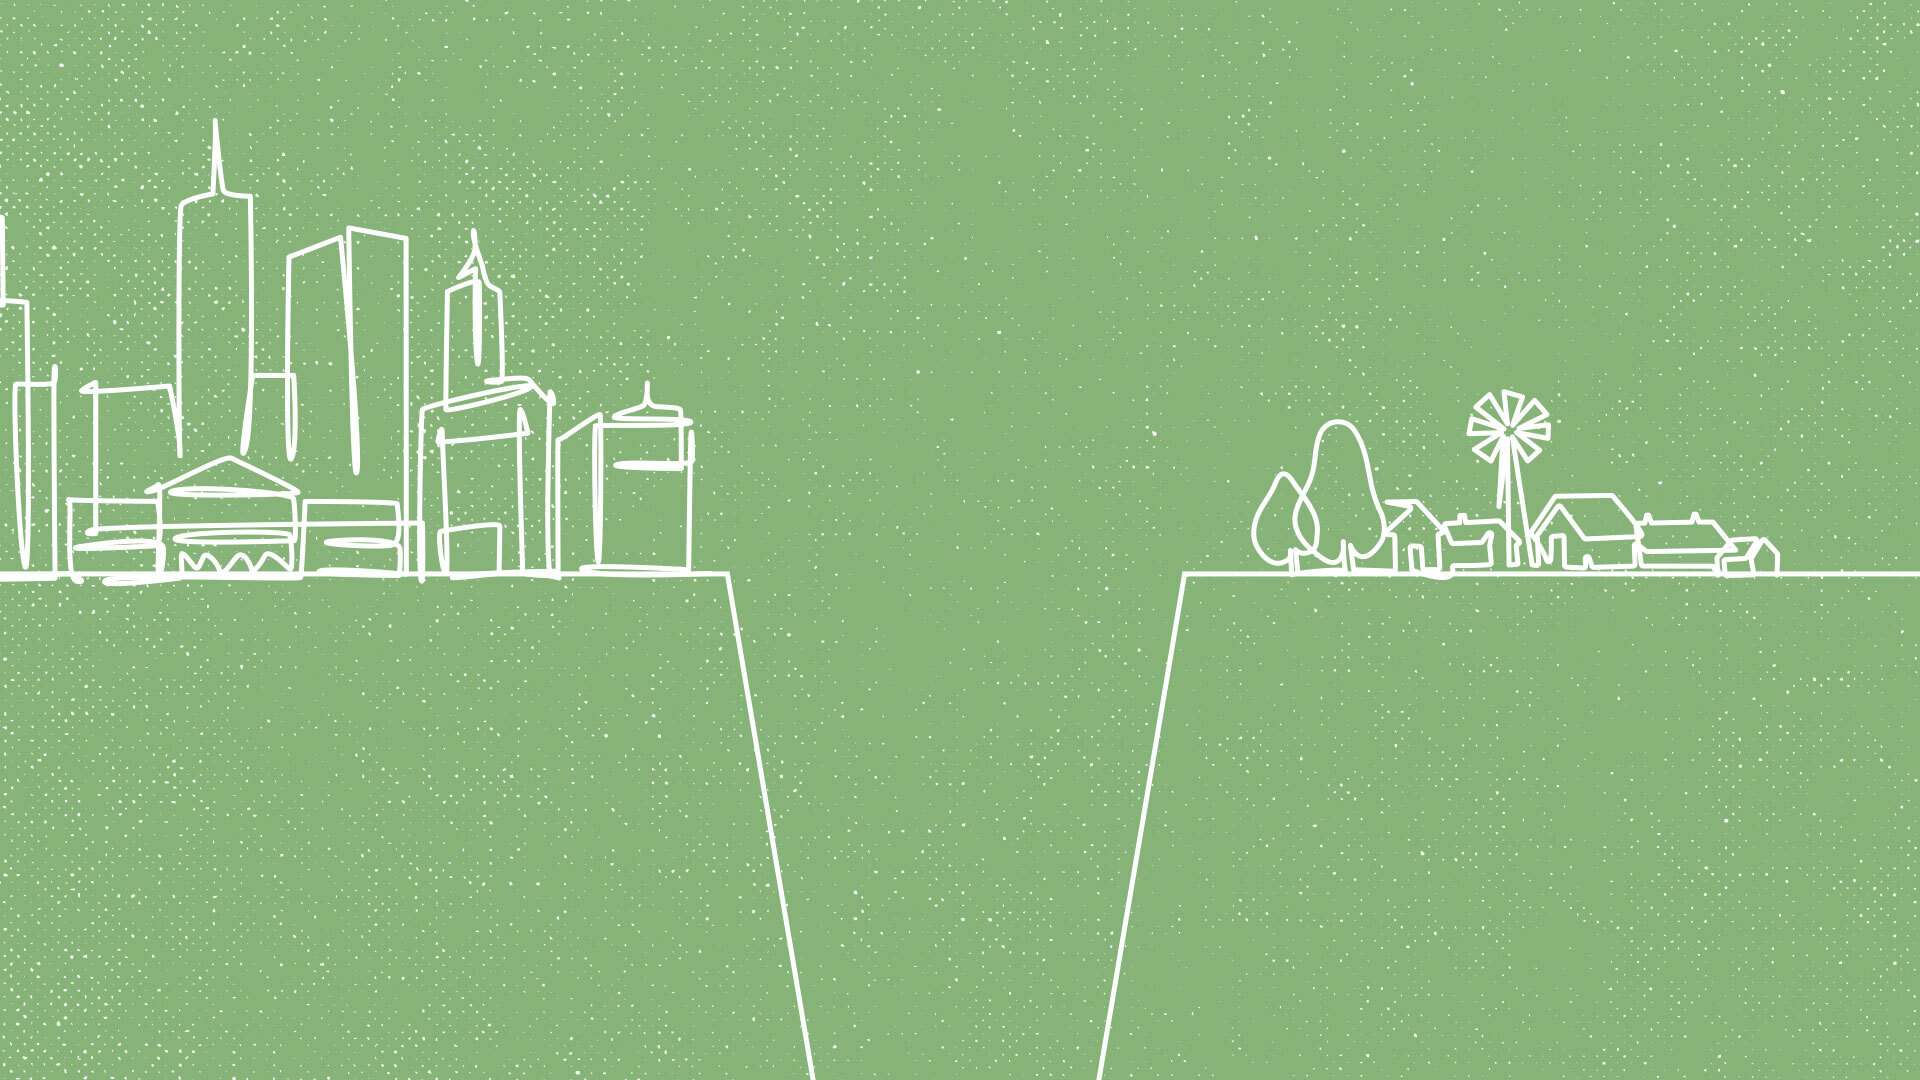 An illustration on a green background depicting a cityscape on the left and a rural community on the right, divided by a deep chasm.